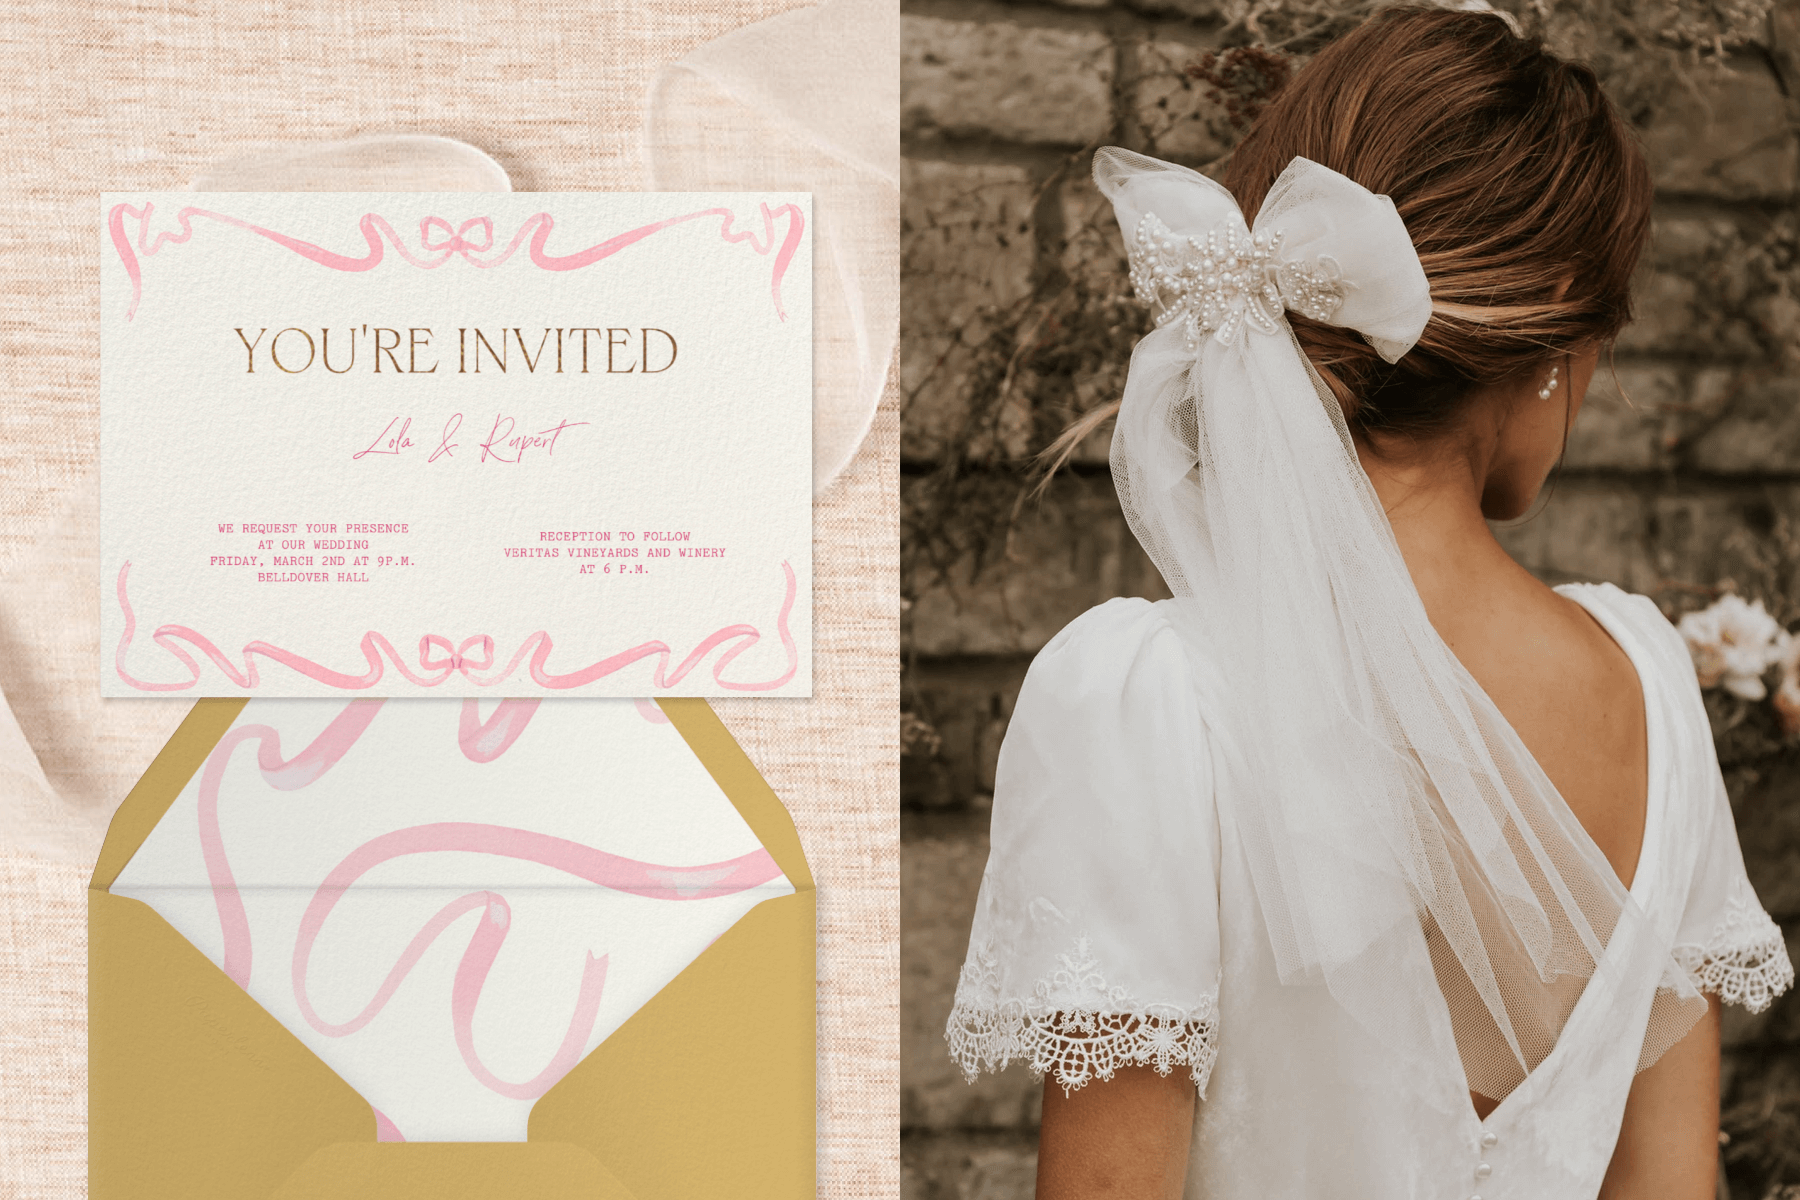 Left: A wedding invitation with painterly pink ribbon bows stretching across both top and bottom. Right: Viewed from behind, a person wears a bow-inspired white veil in their hair.